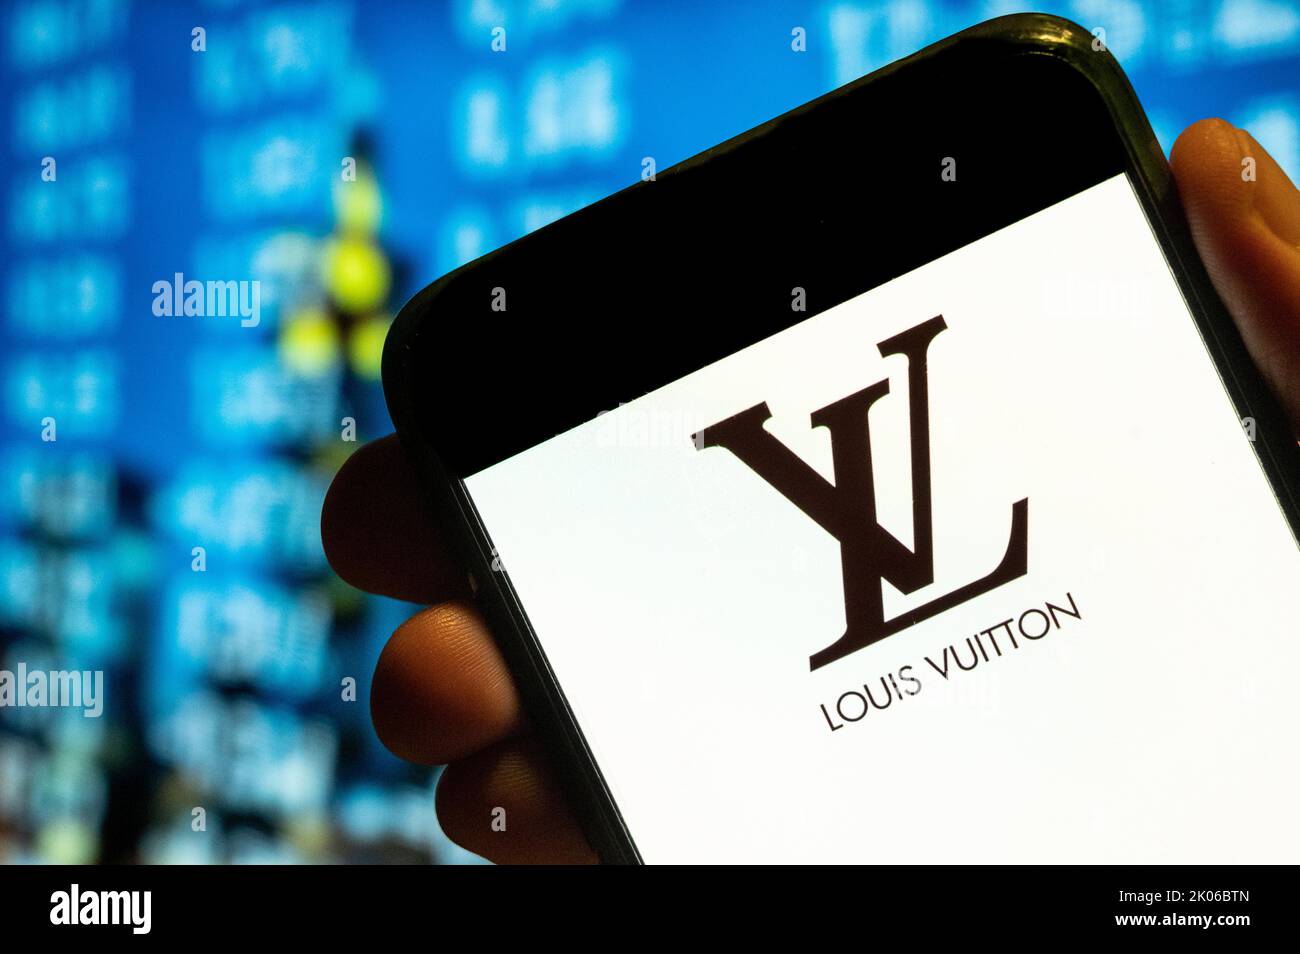 In this photo illustration, the French luxury fashion brand Louis Vuitton (LV) logo is displayed on a smartphone screen. Stock Photo